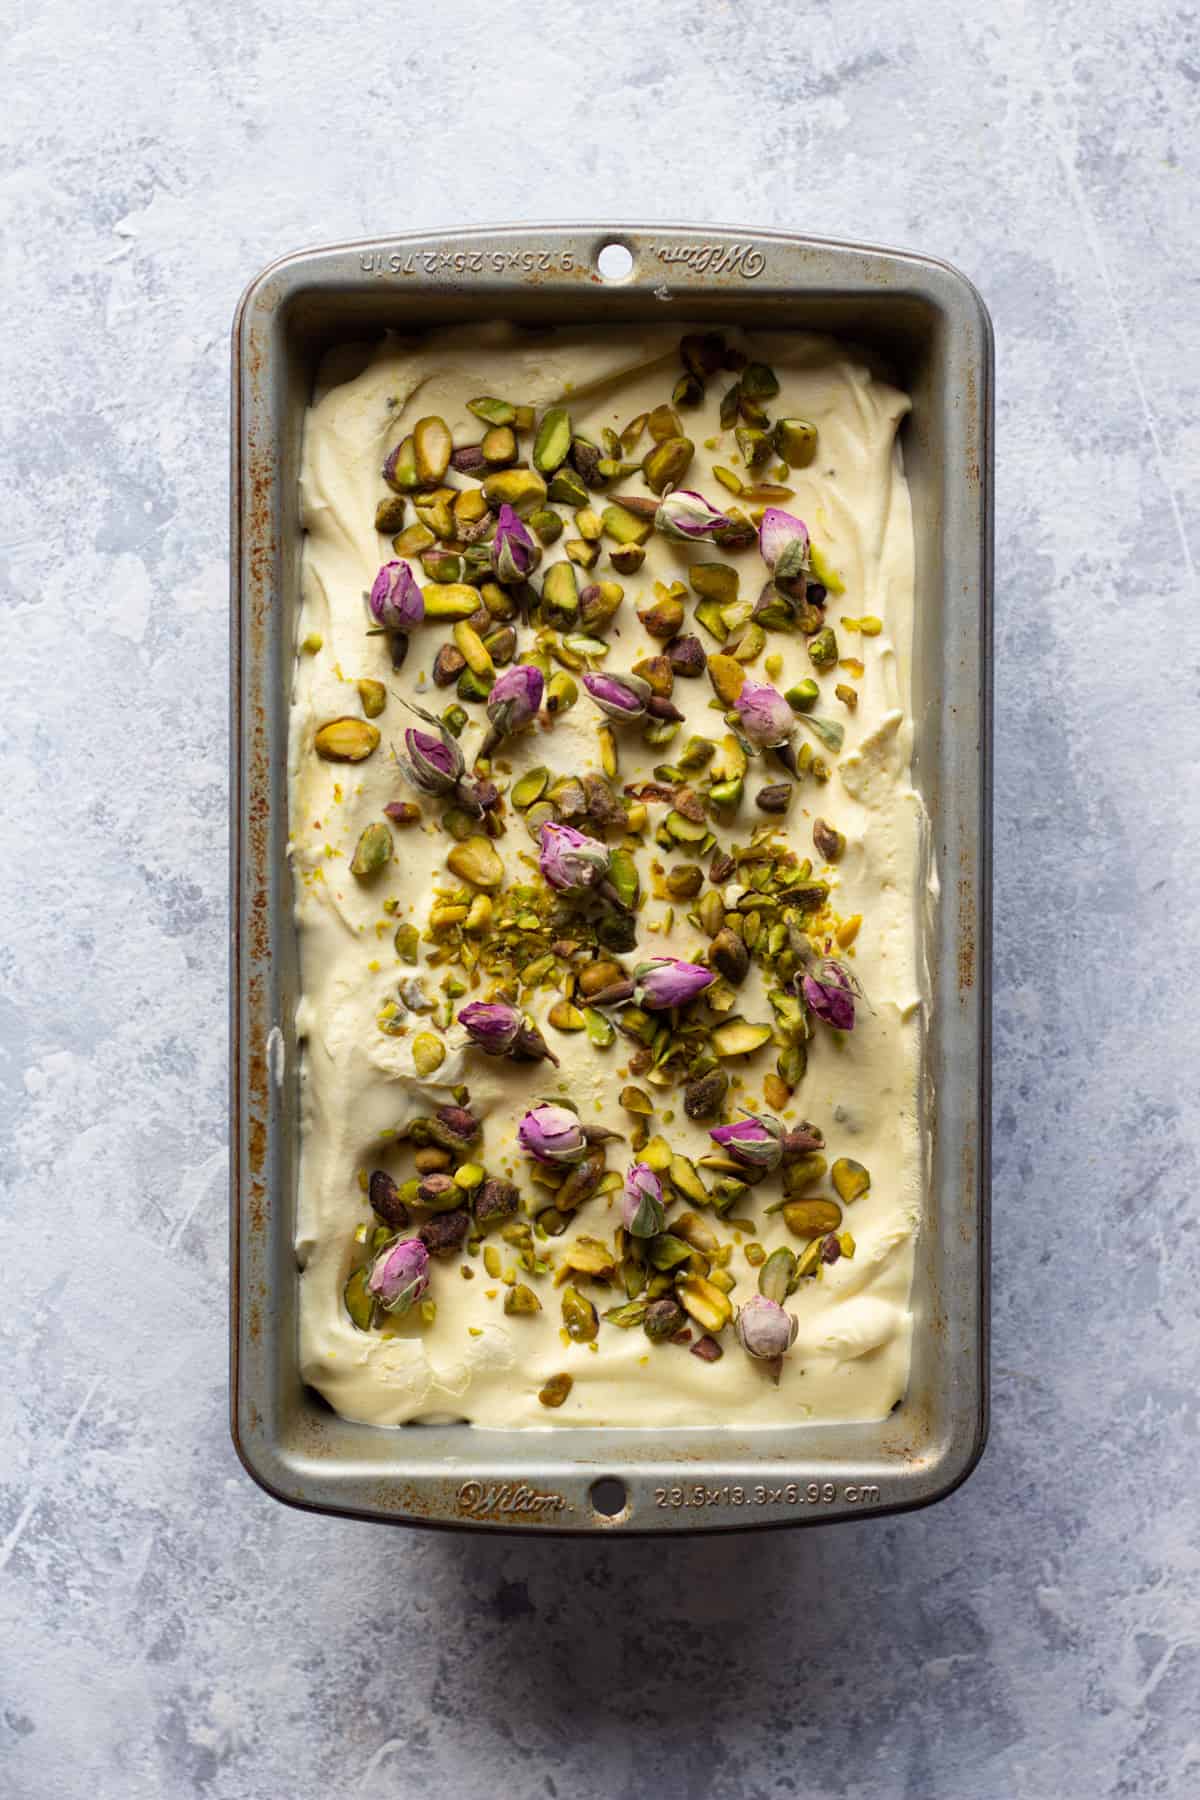 Saffron and pistachio ice cream made in a 9x5 loaf pan. 